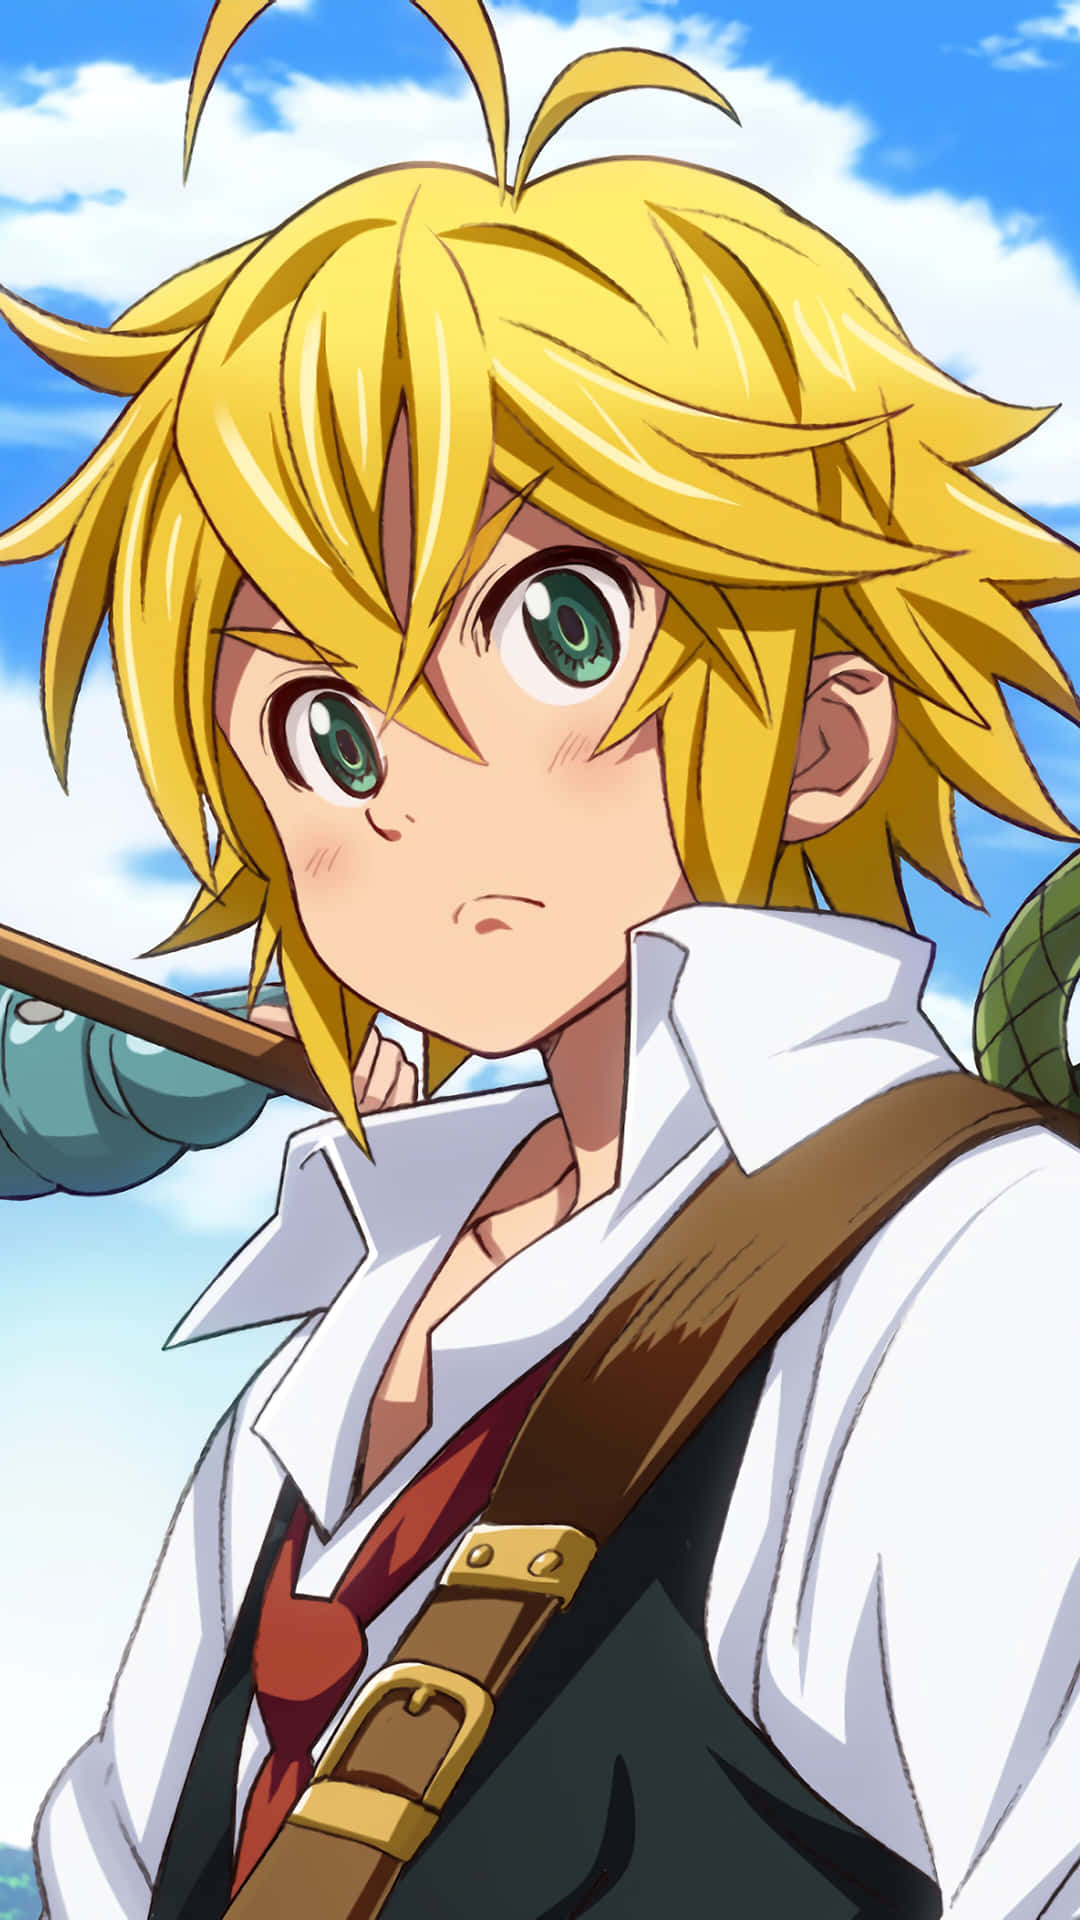 Ready for Action: Meliodas Armed and Ready